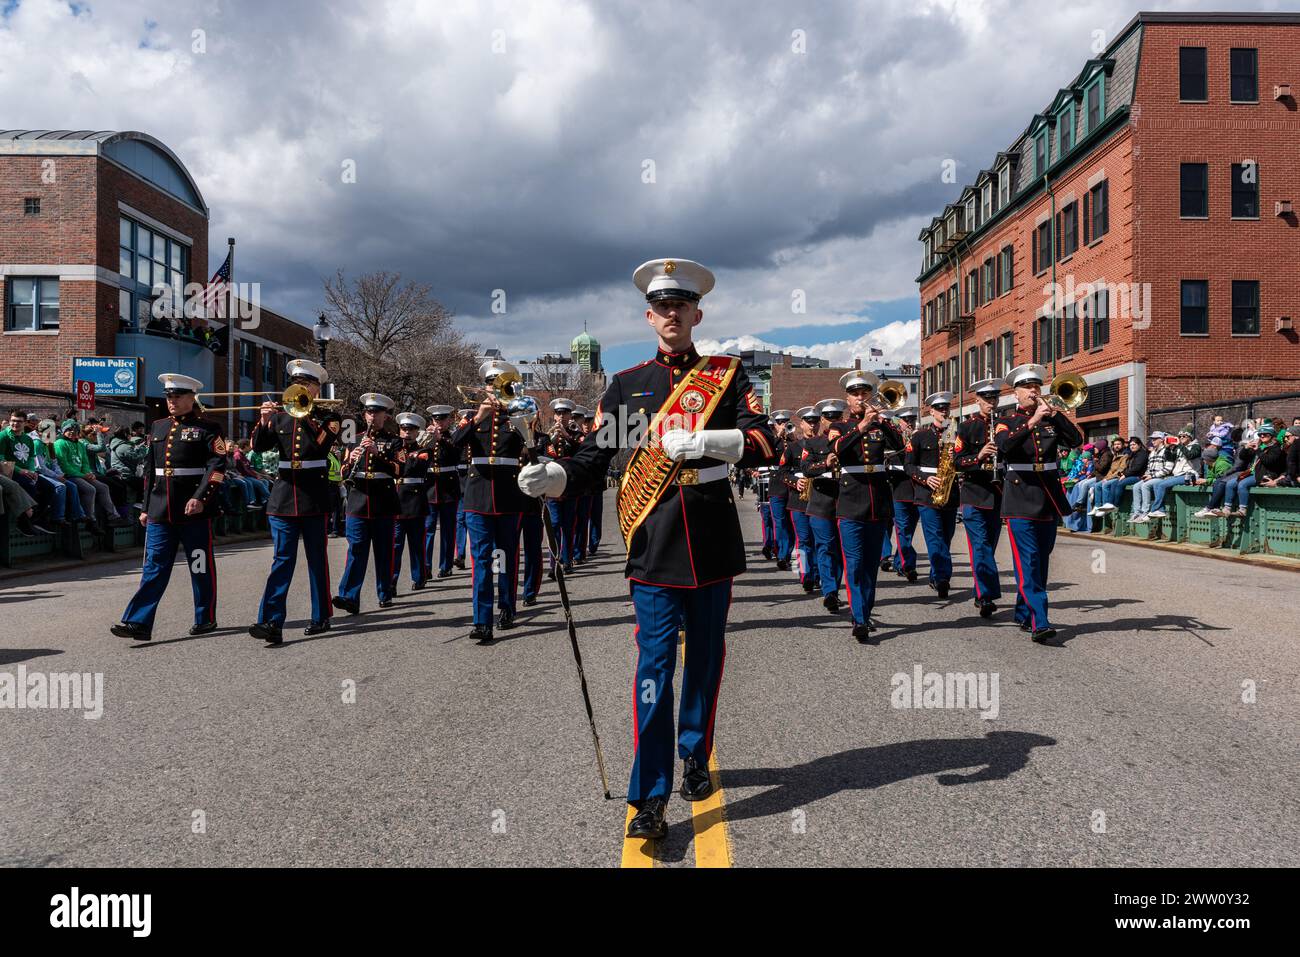 Thousands of people came to enjoy, participate, and celebrate at South Boston Allied War Veterans' South Boston Saint Patrick's Day Parade. Boston, Ma Stock Photo